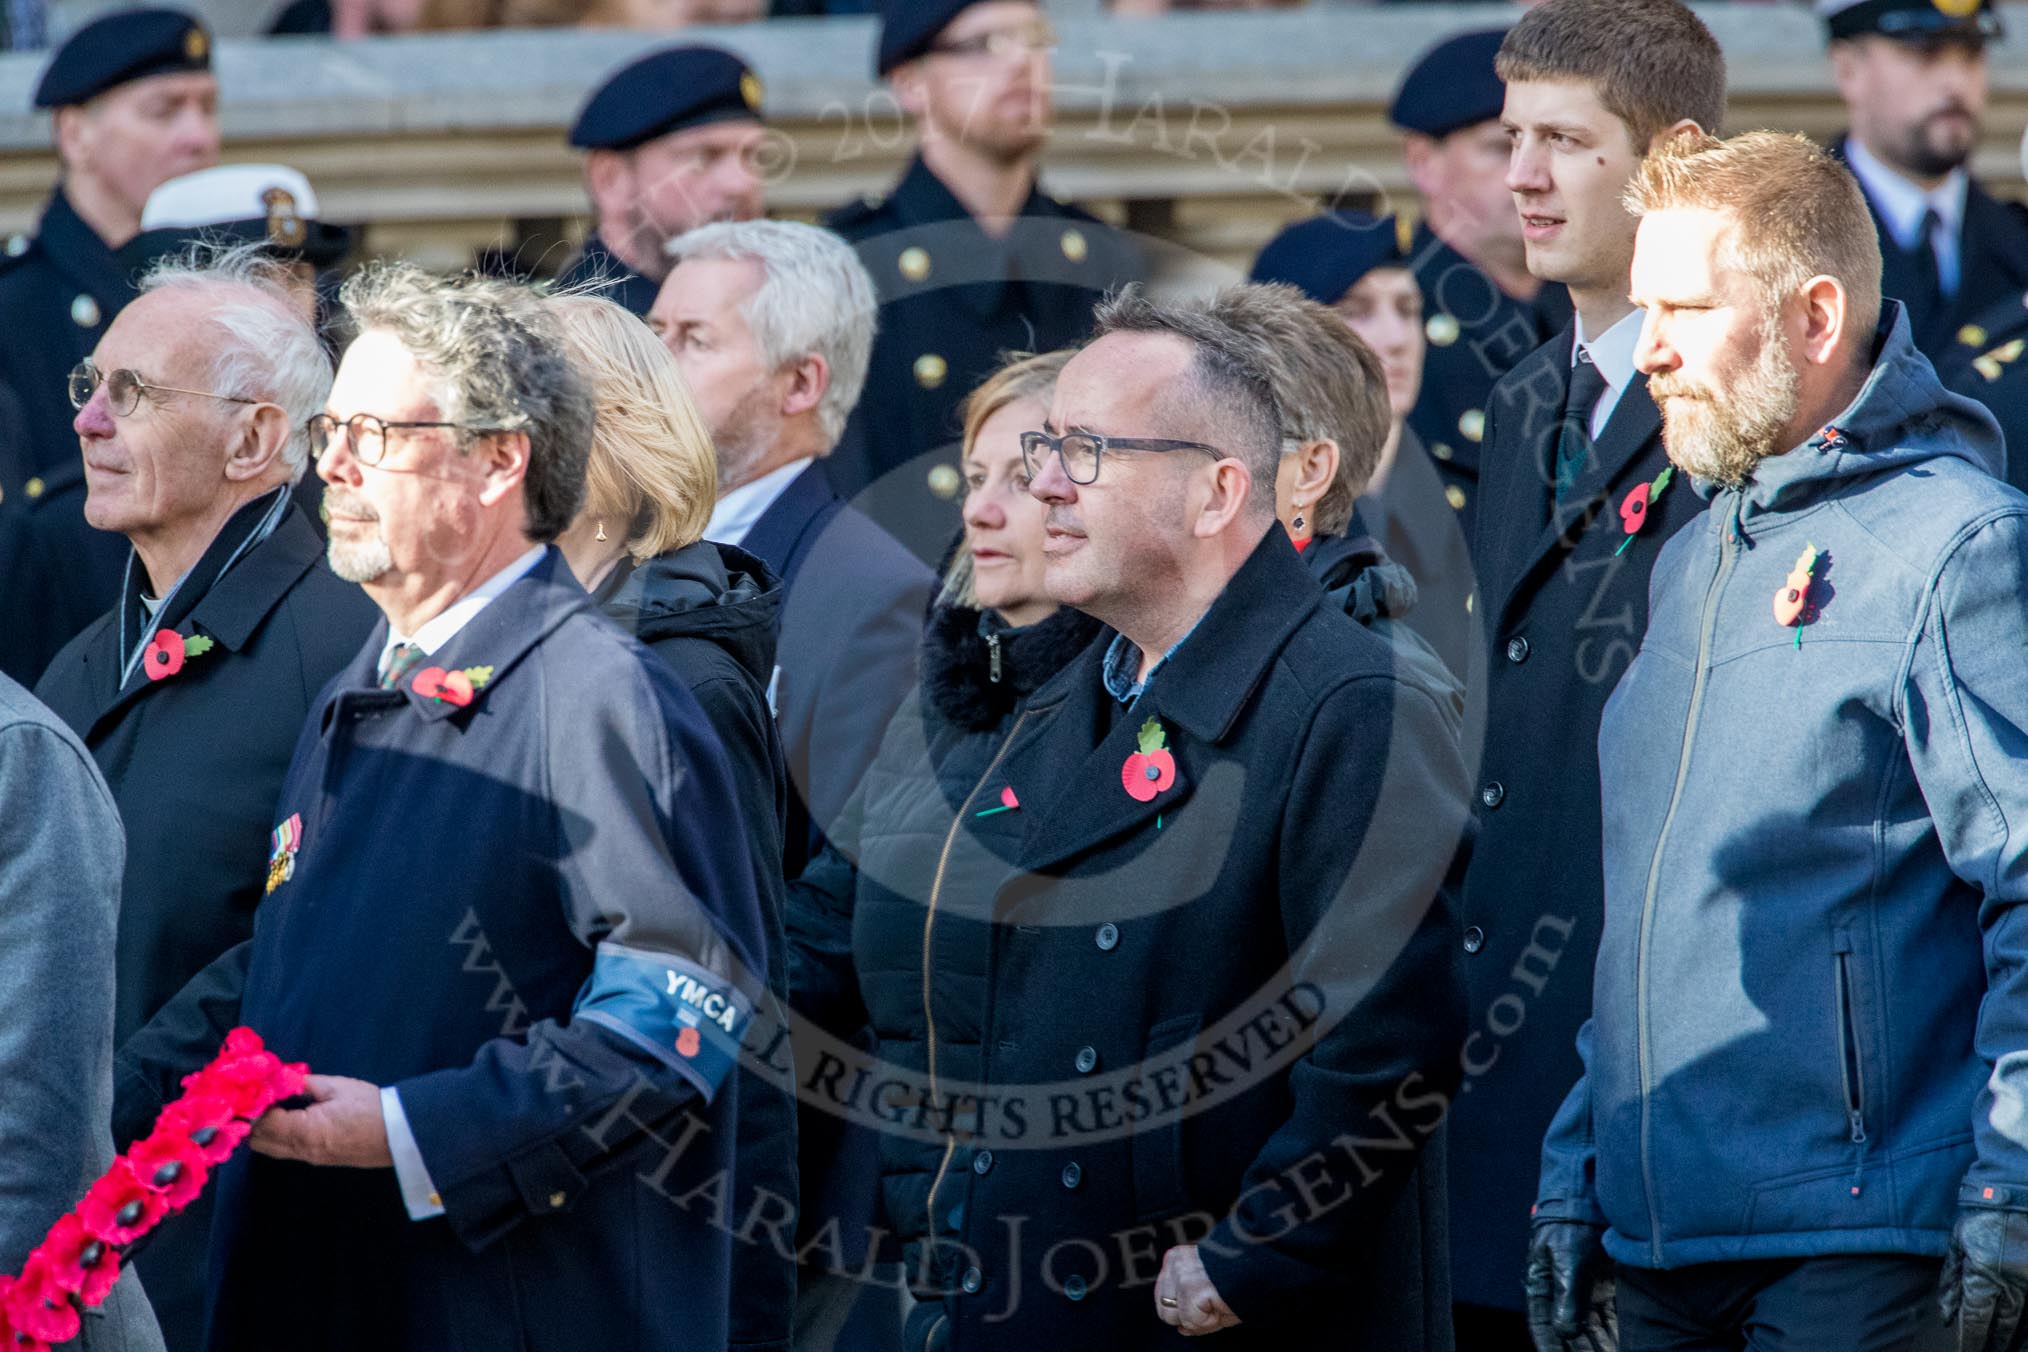 YMCA (Group M49, 30 members) during the Royal British Legion March Past on Remembrance Sunday at the Cenotaph, Whitehall, Westminster, London, 11 November 2018, 12:31.